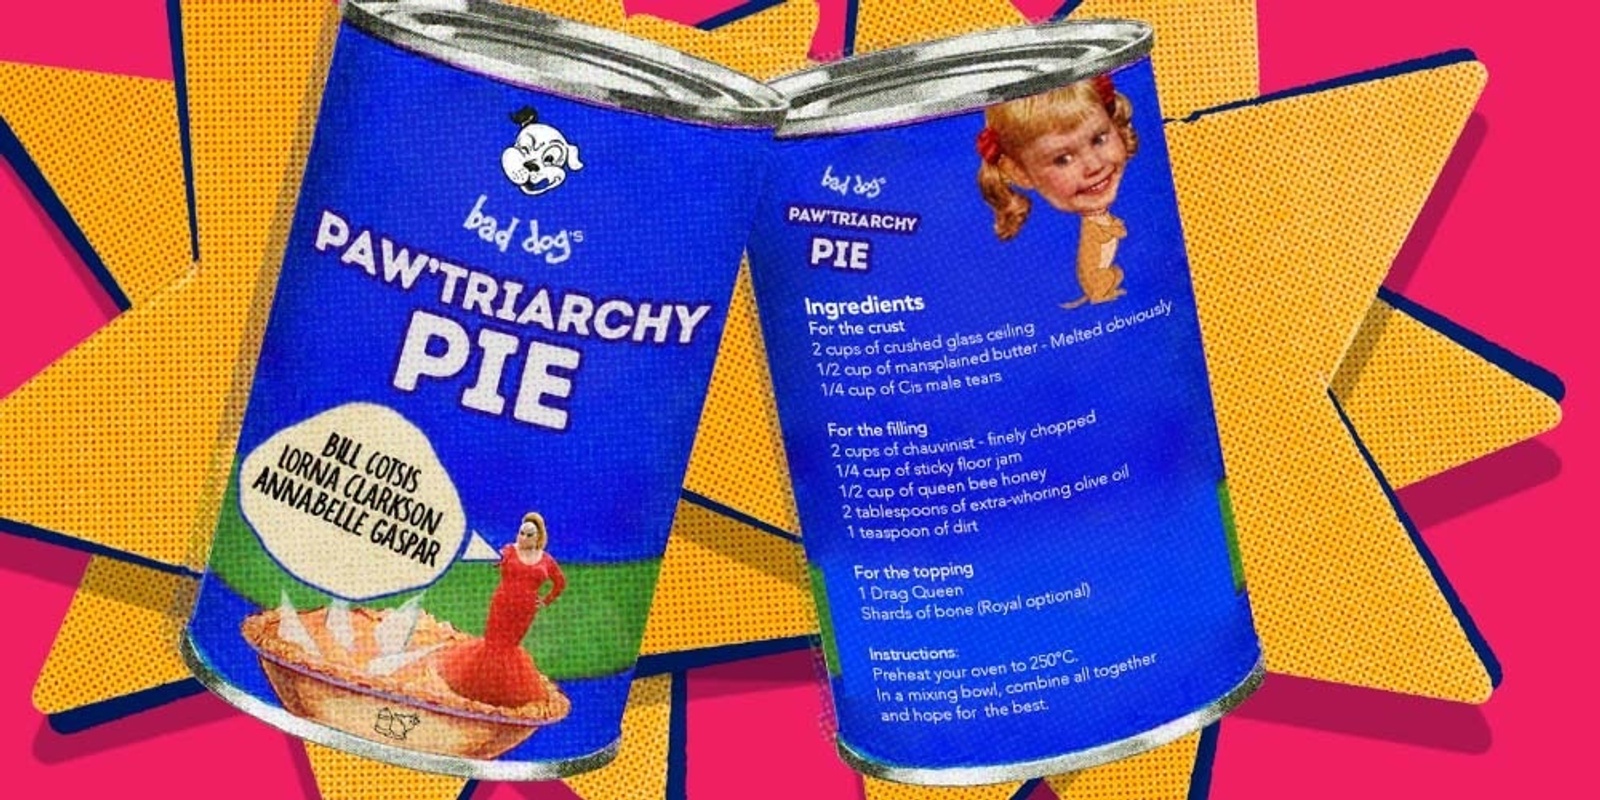 Banner image for Bad dog's Paw'triarchy Pie